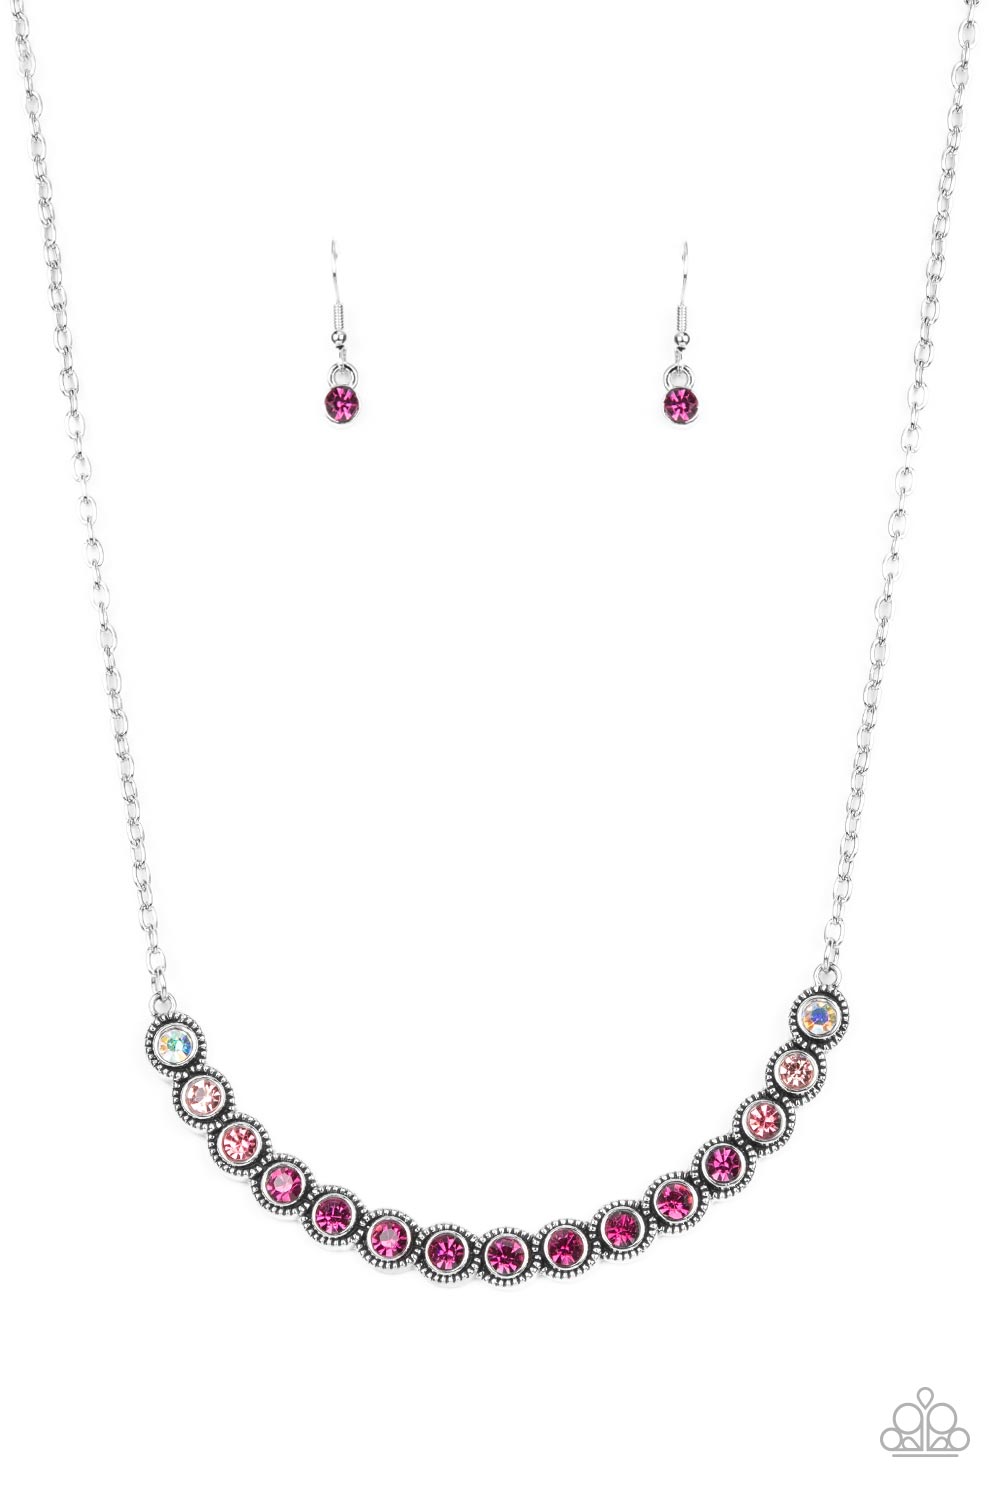 Throwing SHADES Pink Rhinestone Necklace - Paparazzi Accessories - lightbox -CarasShop.com - $5 Jewelry by Cara Jewels